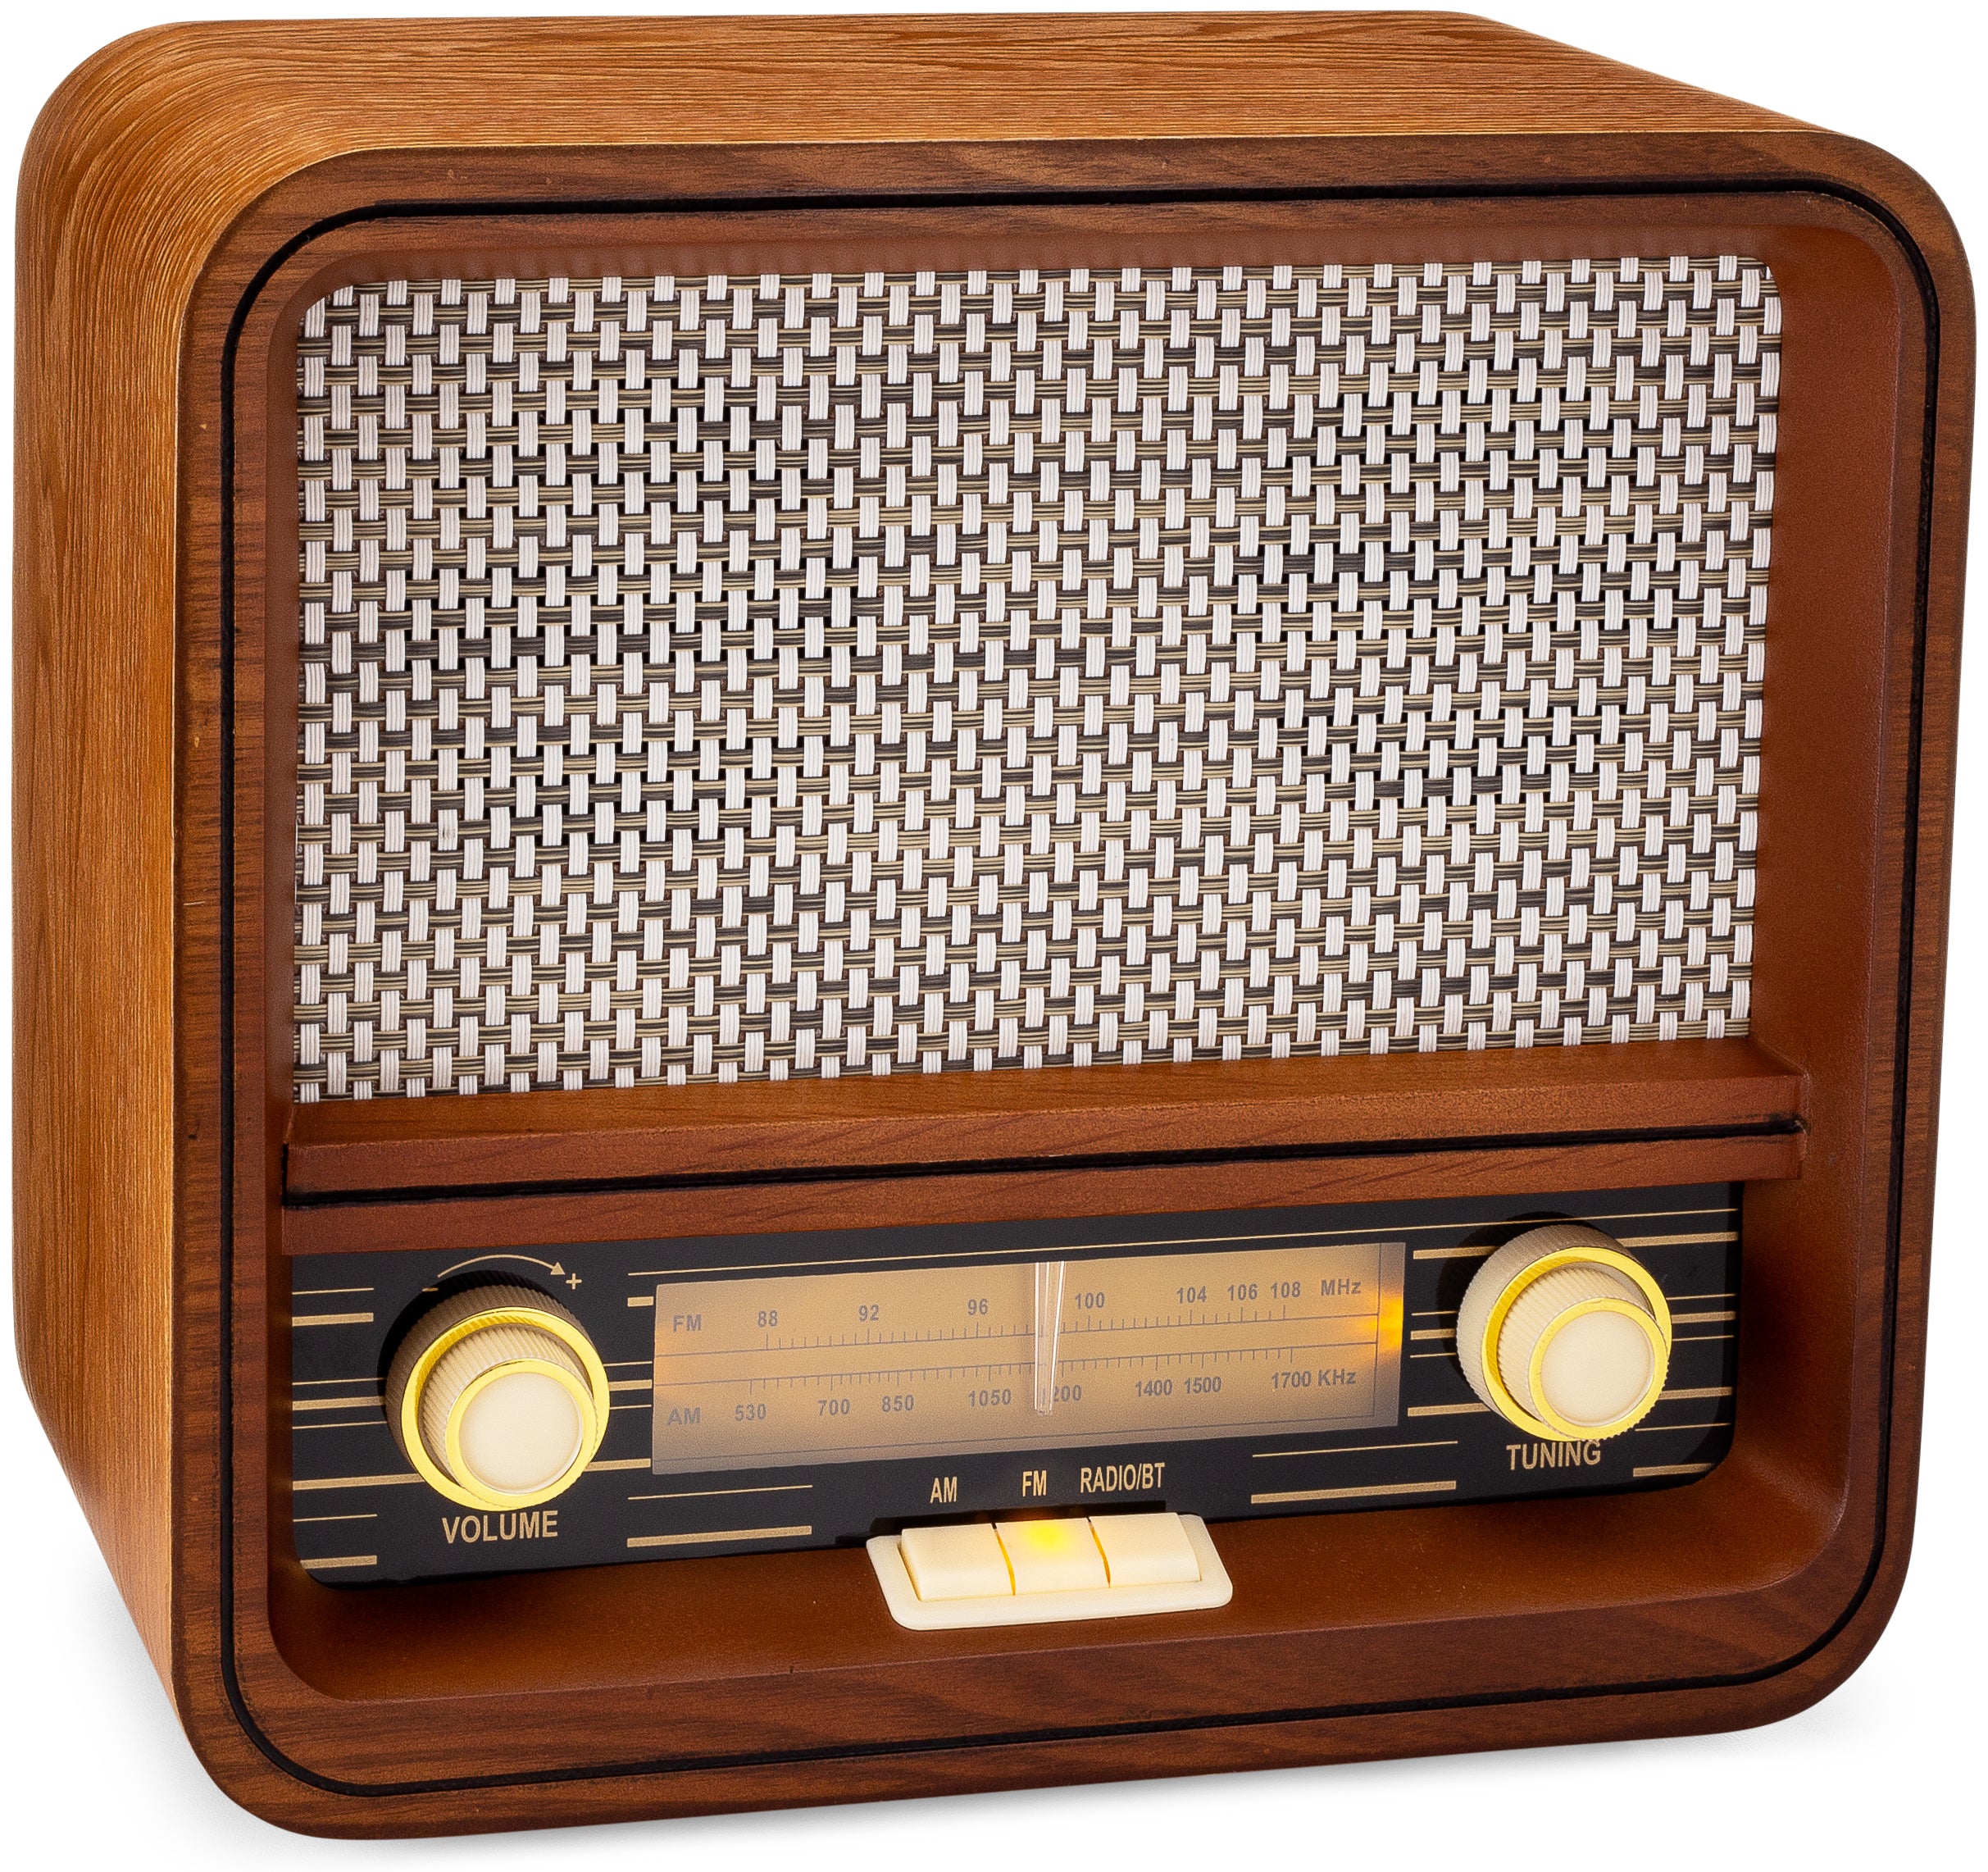 Clearclick Classic Vintage Retro Style AM/FM Radio with Bluetooth & Aux-in - Handmade Wooden Exterior